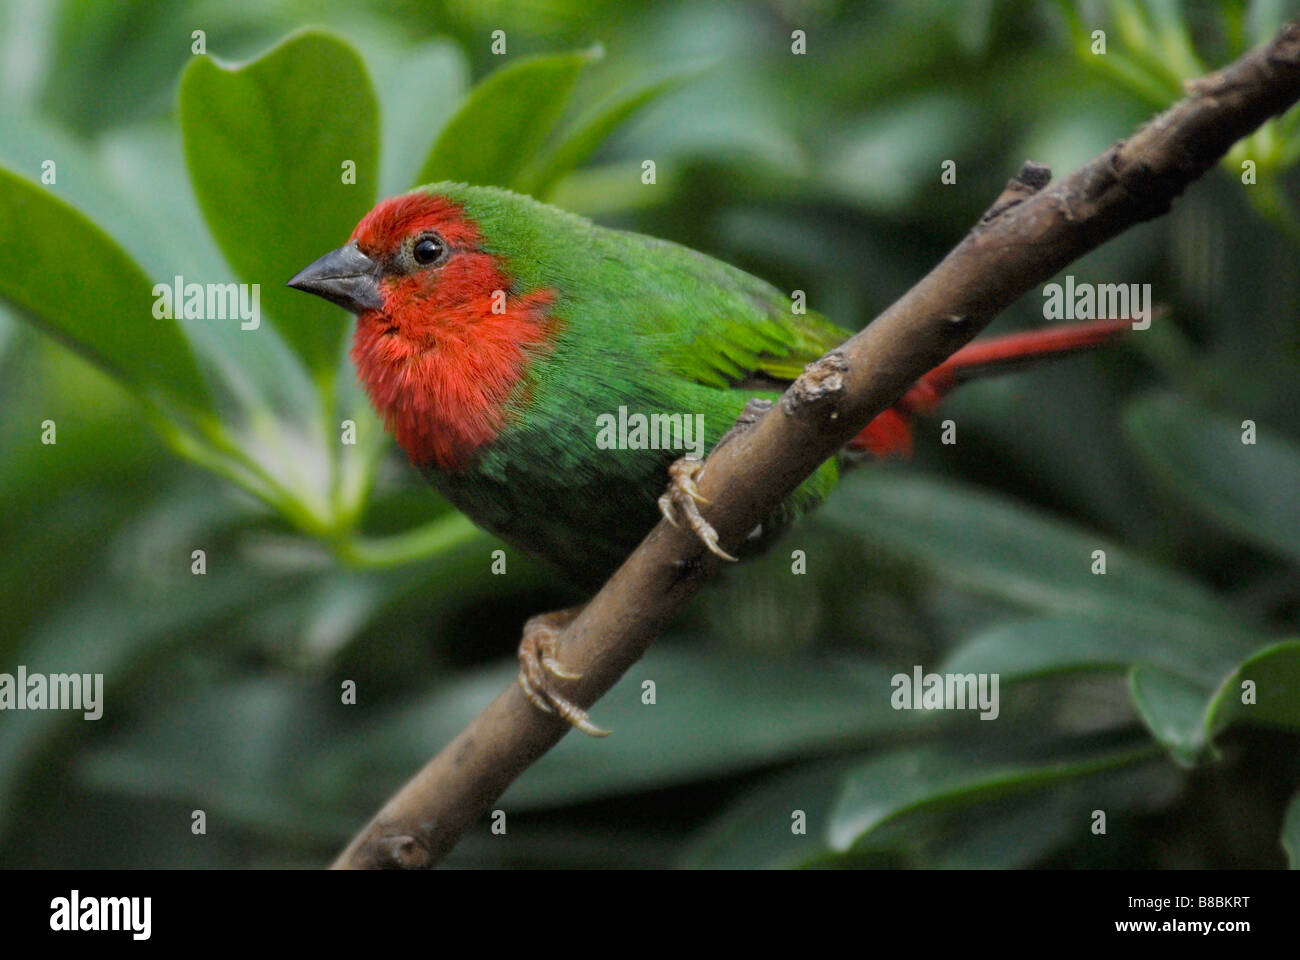 Red-brested Parrot-finch 'Erythrura psittacea' Stock Photo